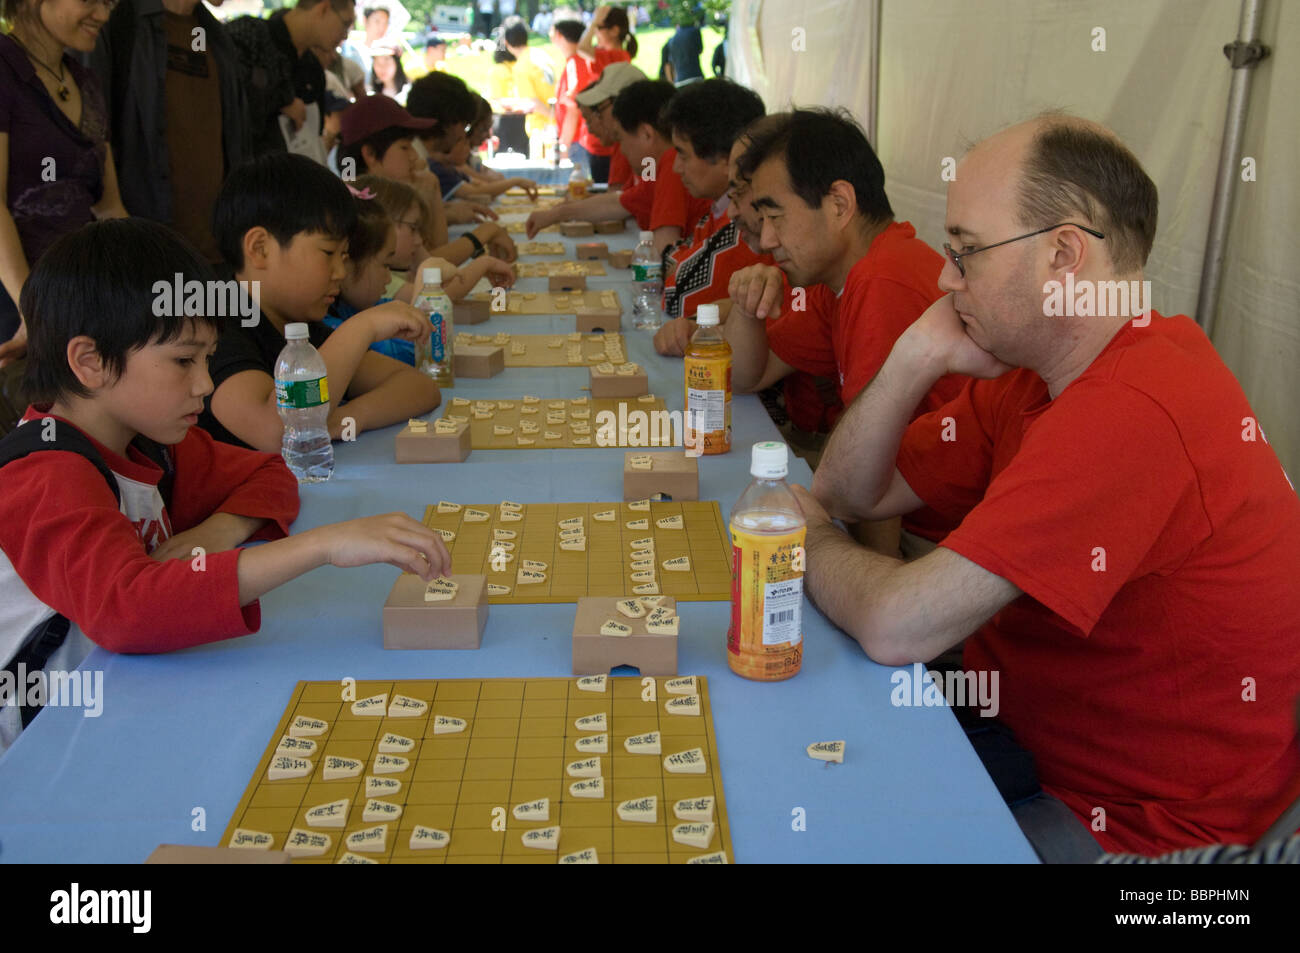 Children and adults play the Japanese game of chess called Shogi Stock Photo